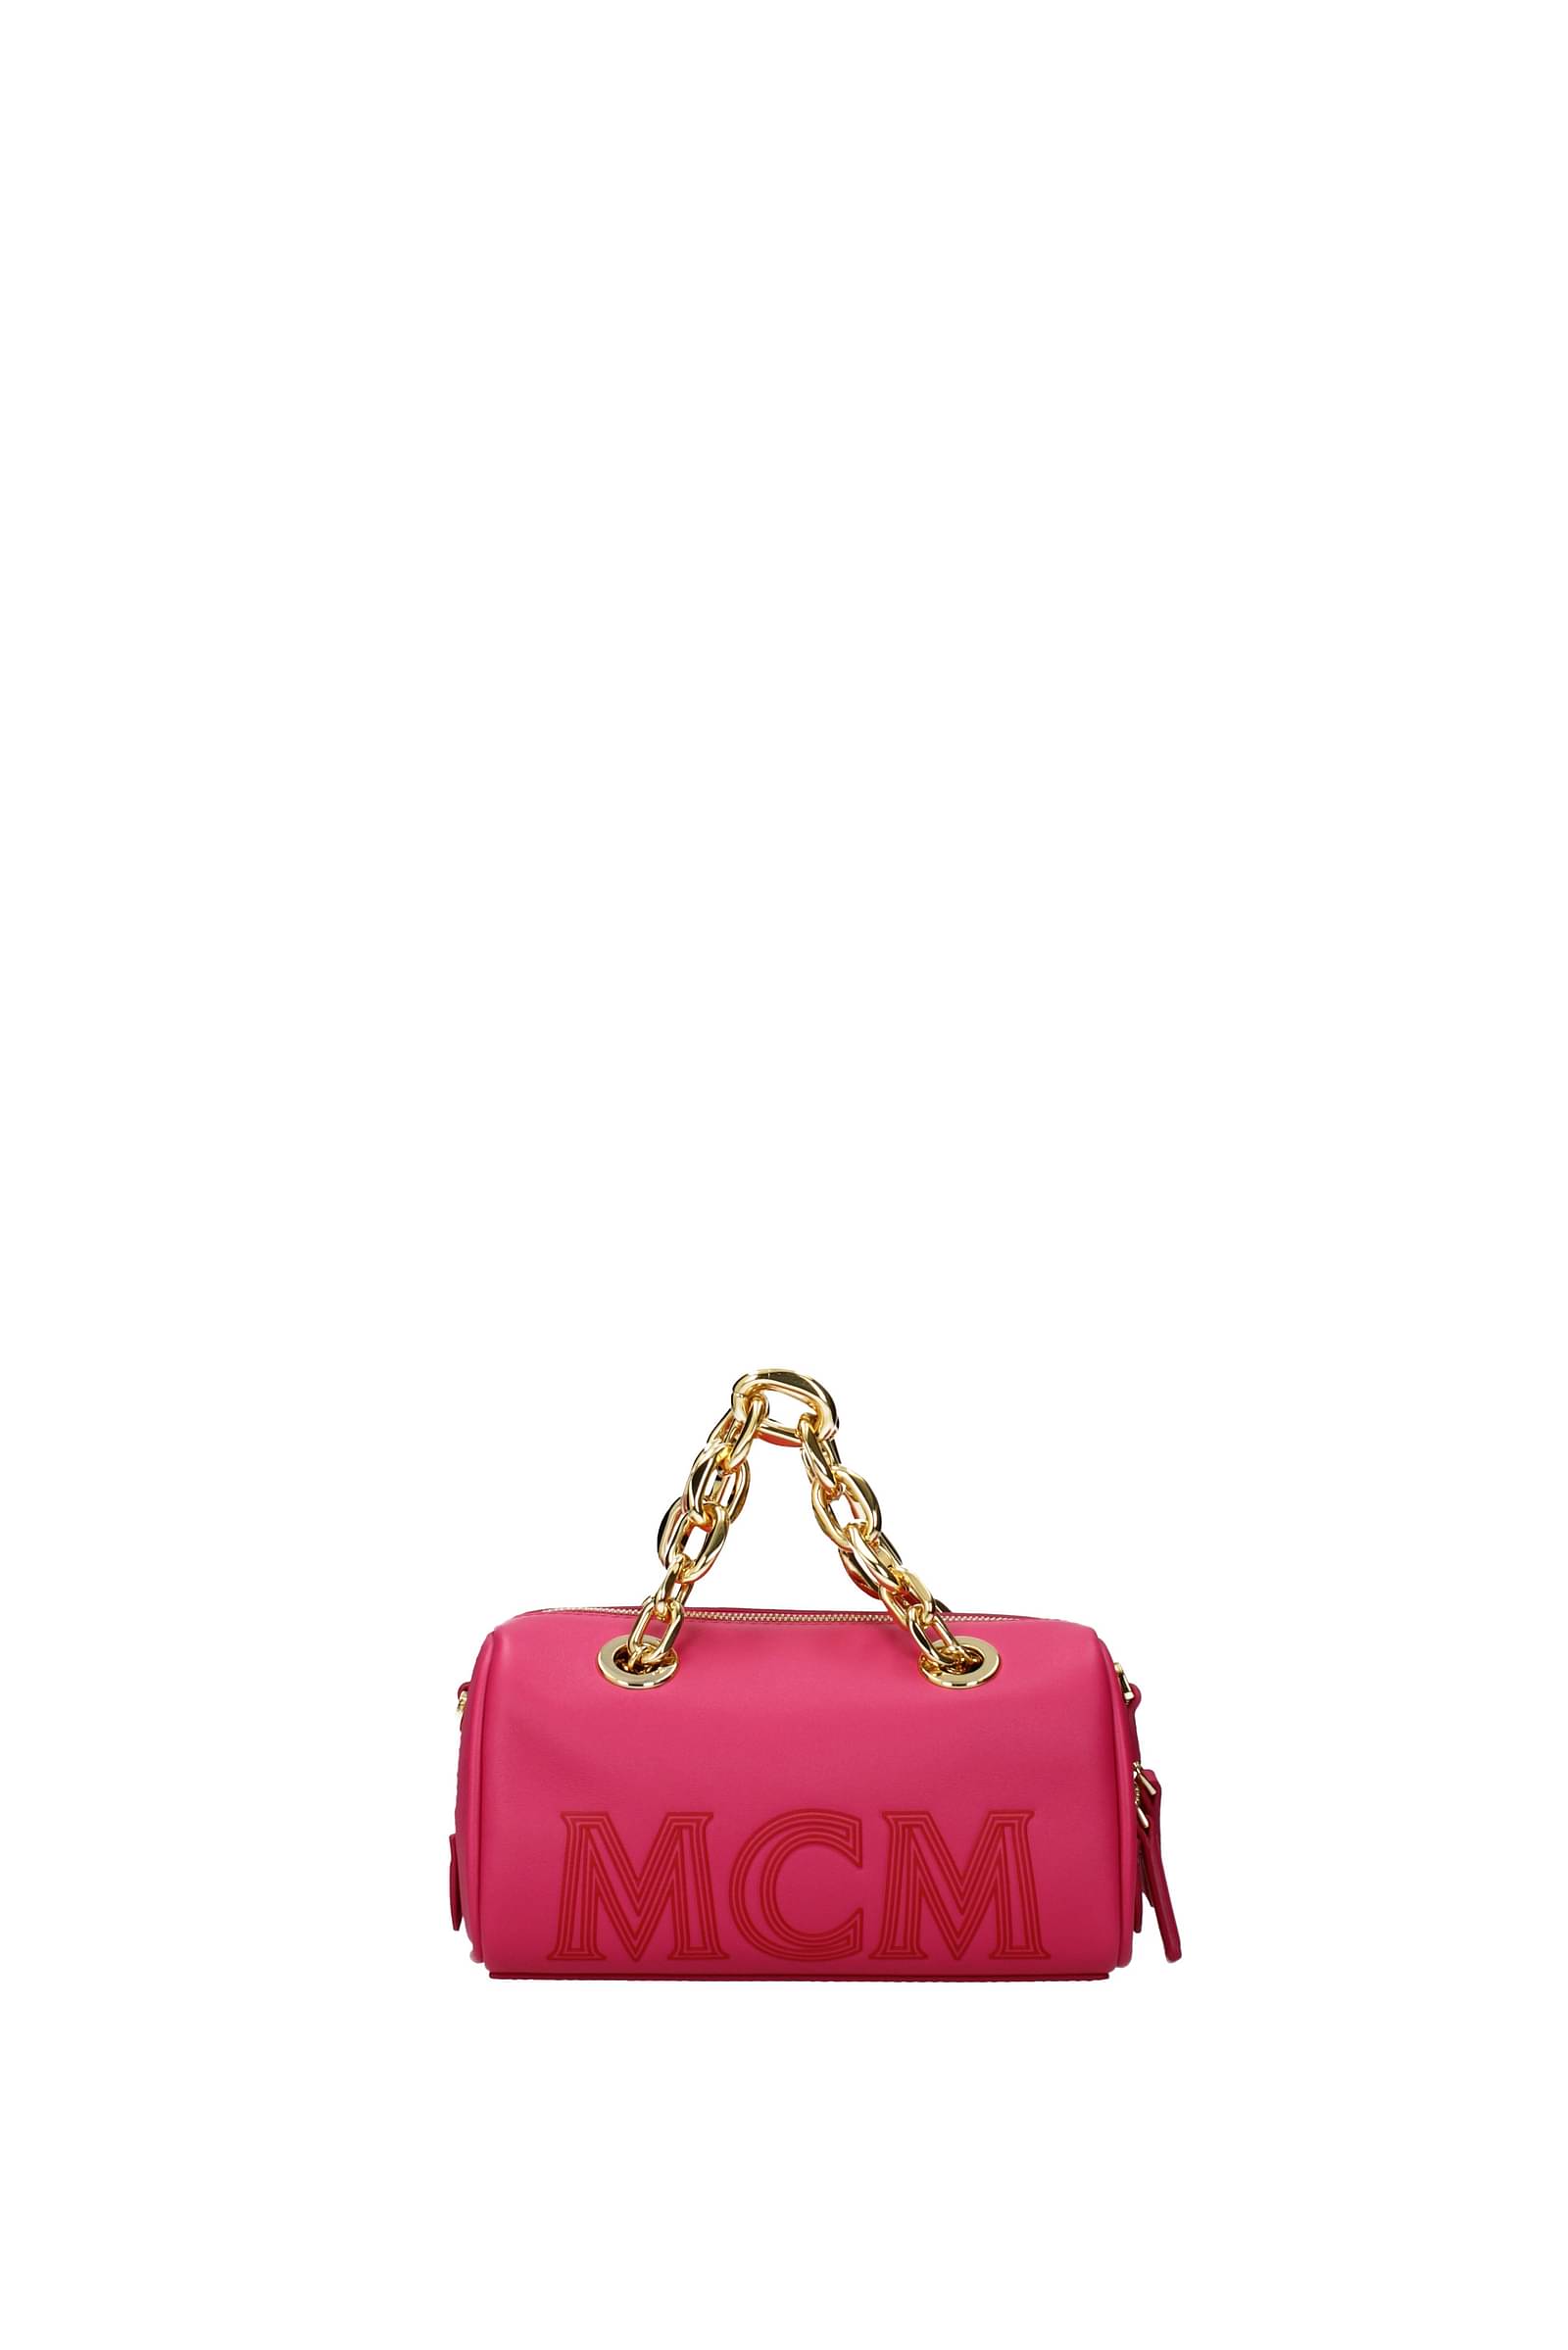 MCM LeatherTrimmed Visetos Weekender  Pink Luggage and Travel Handbags   W3047180  The RealReal